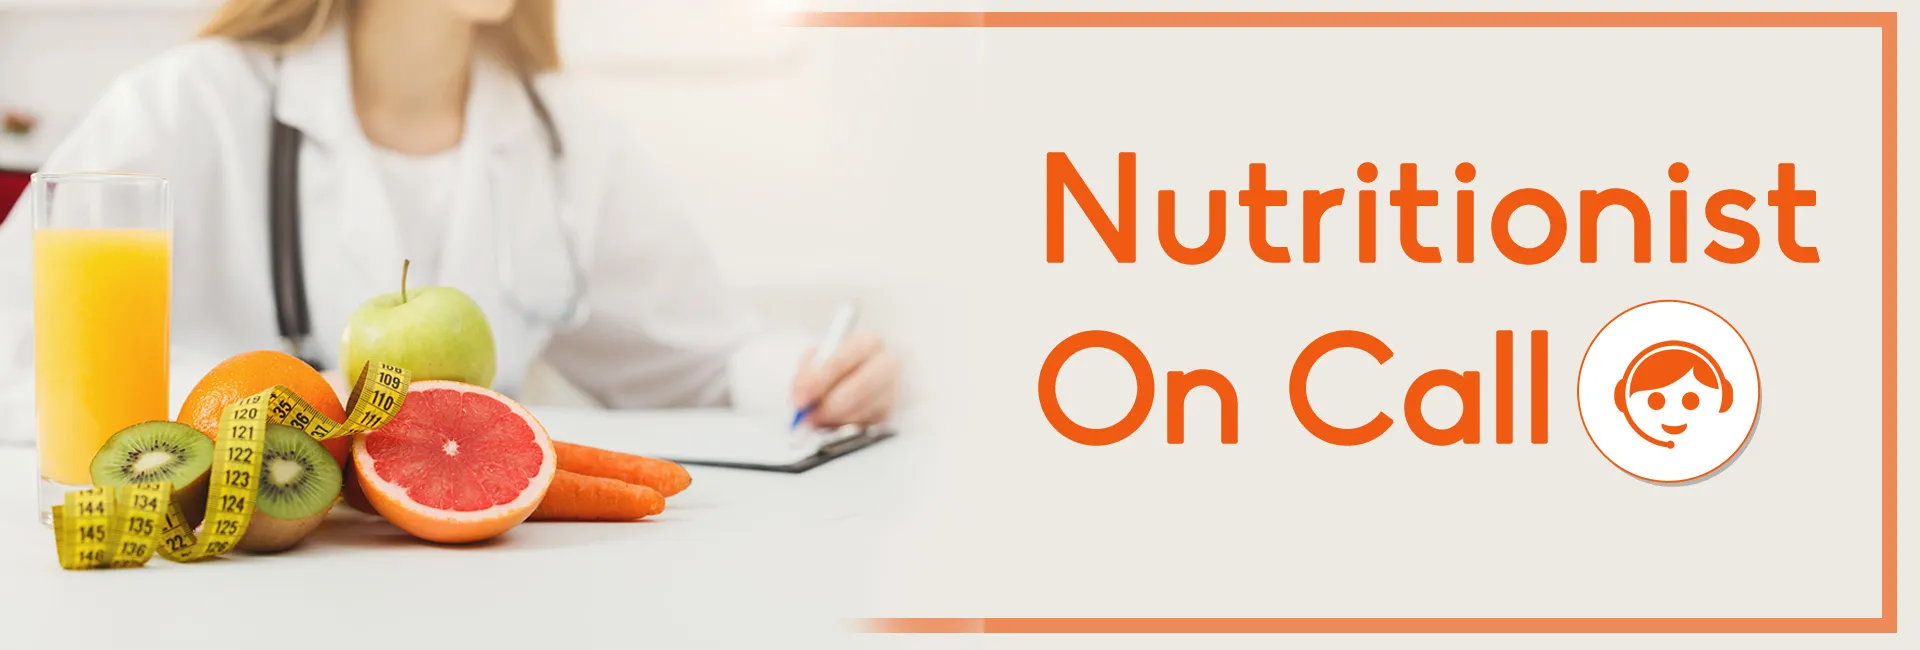 Nutritionist On Call In Innisfil